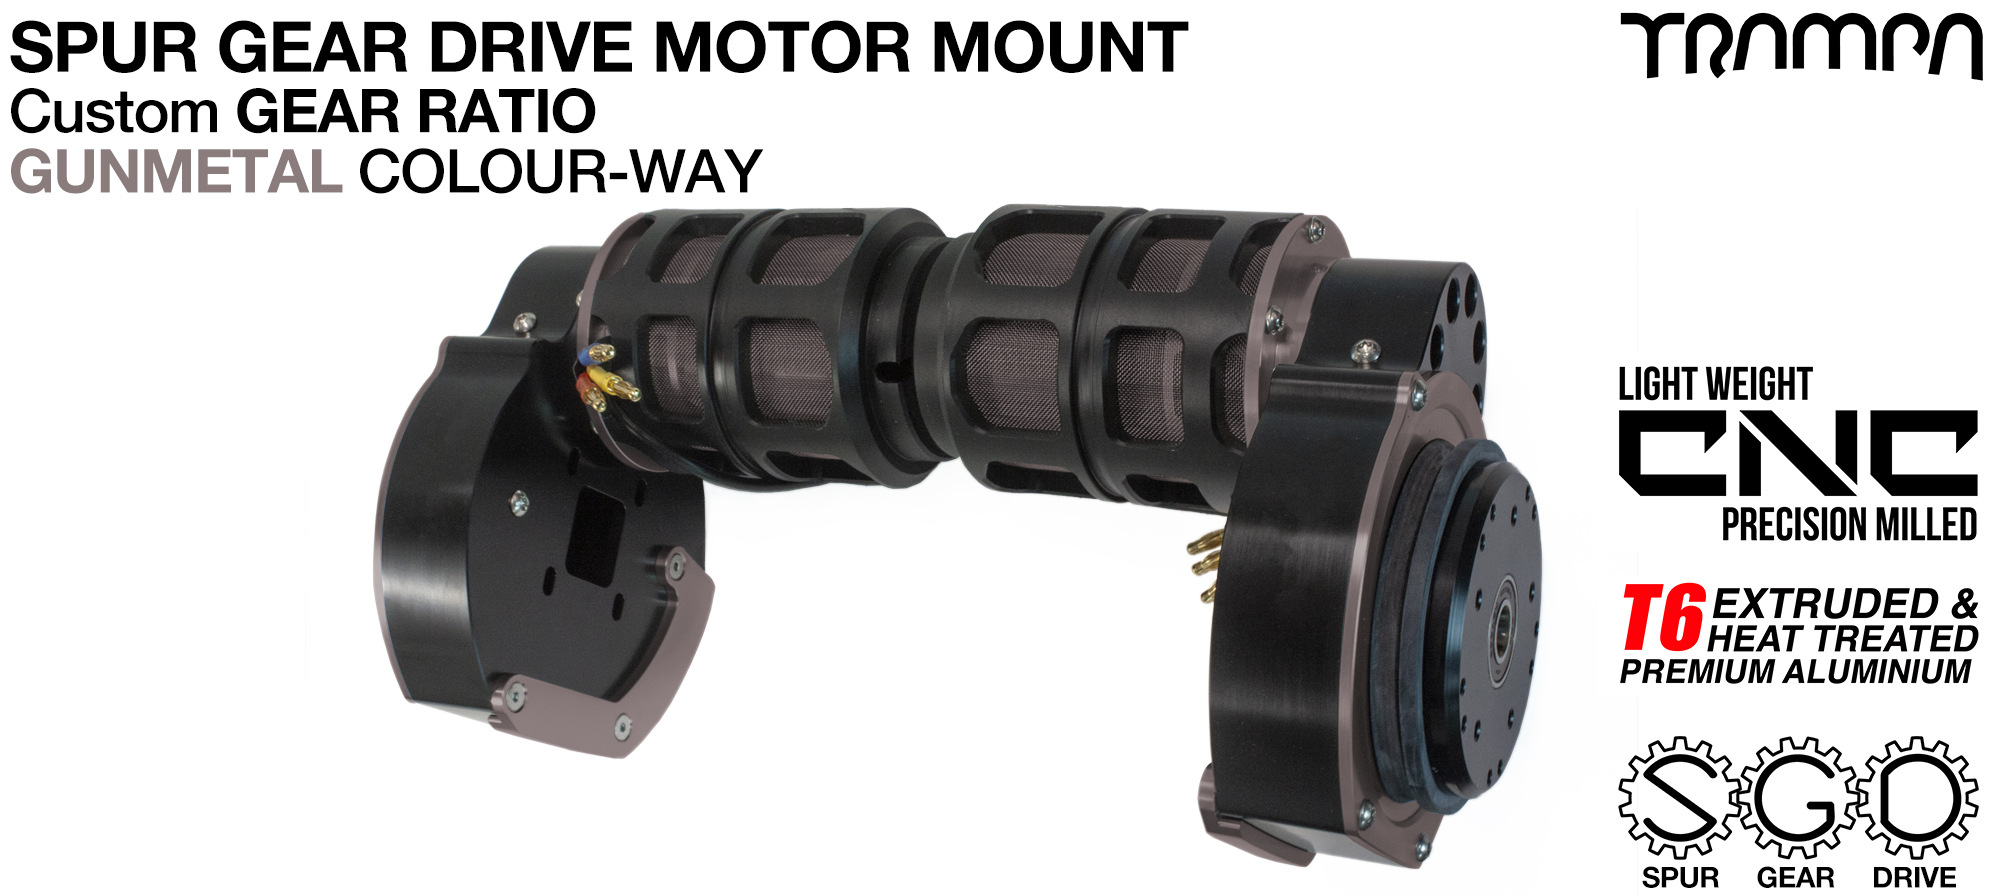 Mountainboard Spur Gear Drive TWIN Motor Mount with PULLEYS & FILTERS - GUNMETAL